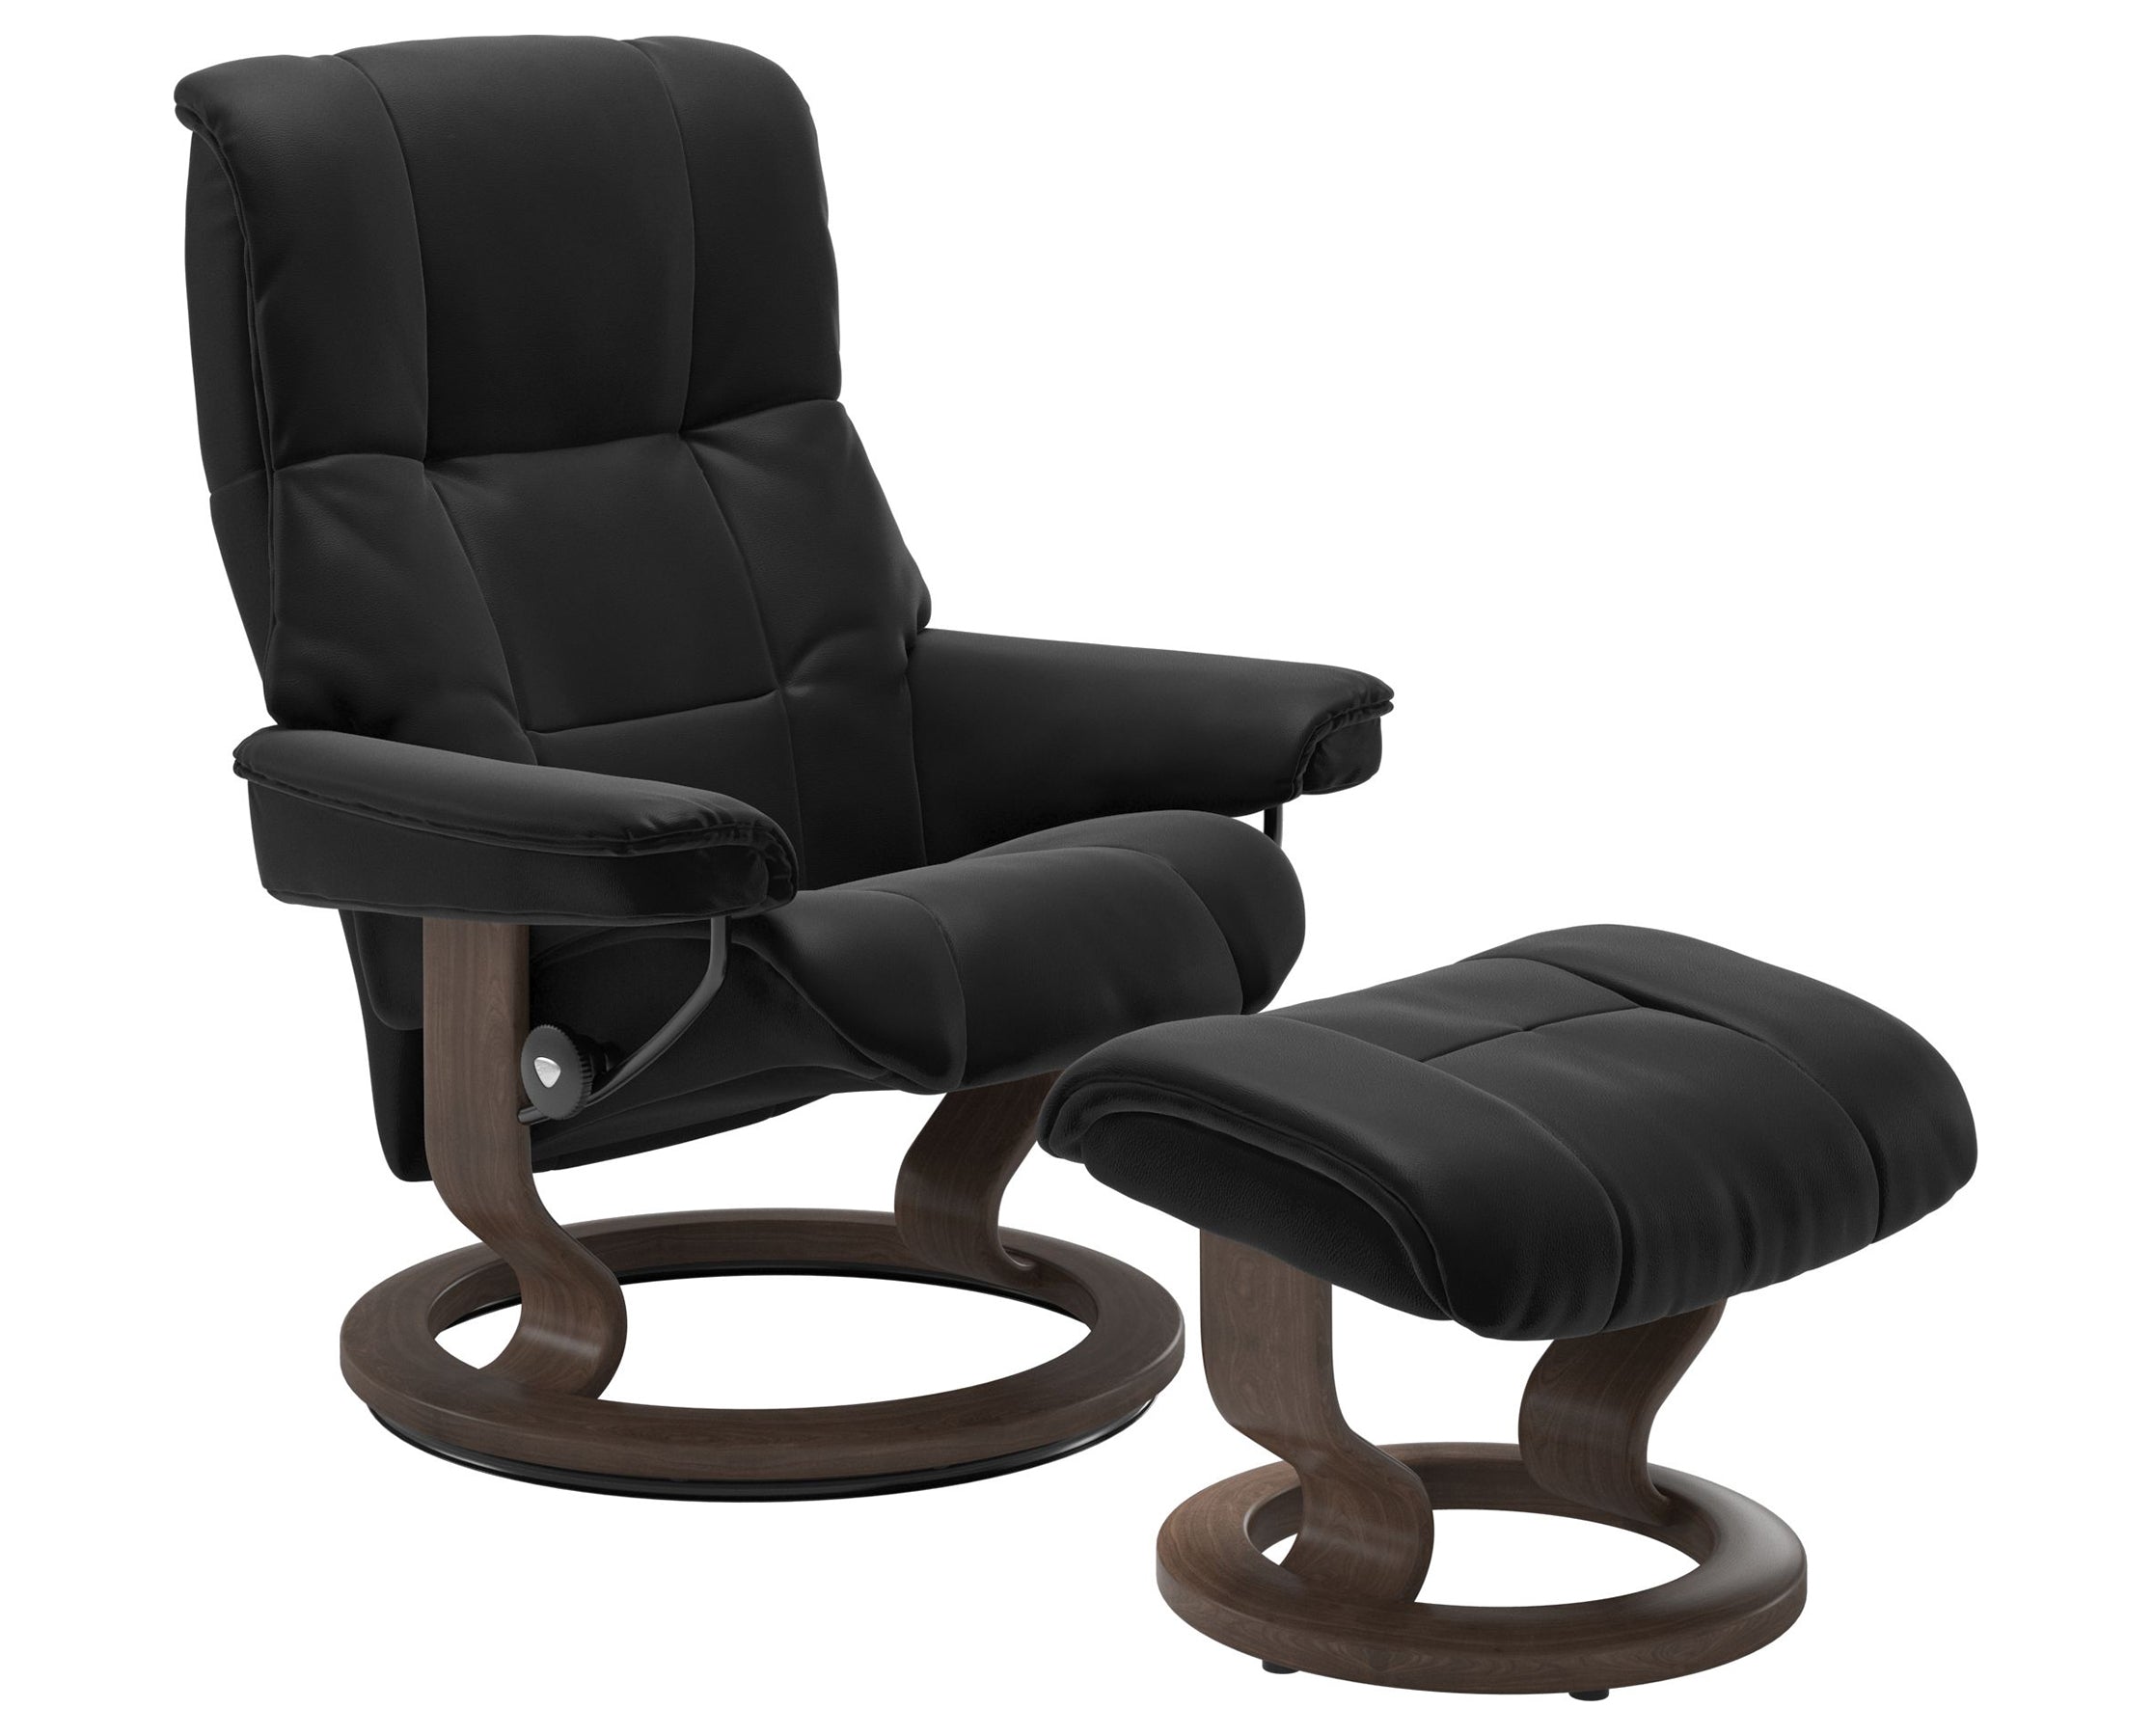 Paloma Leather Black S/M/L and Walnut Base | Stressless Mayfair Classic Recliner | Valley Ridge Furniture